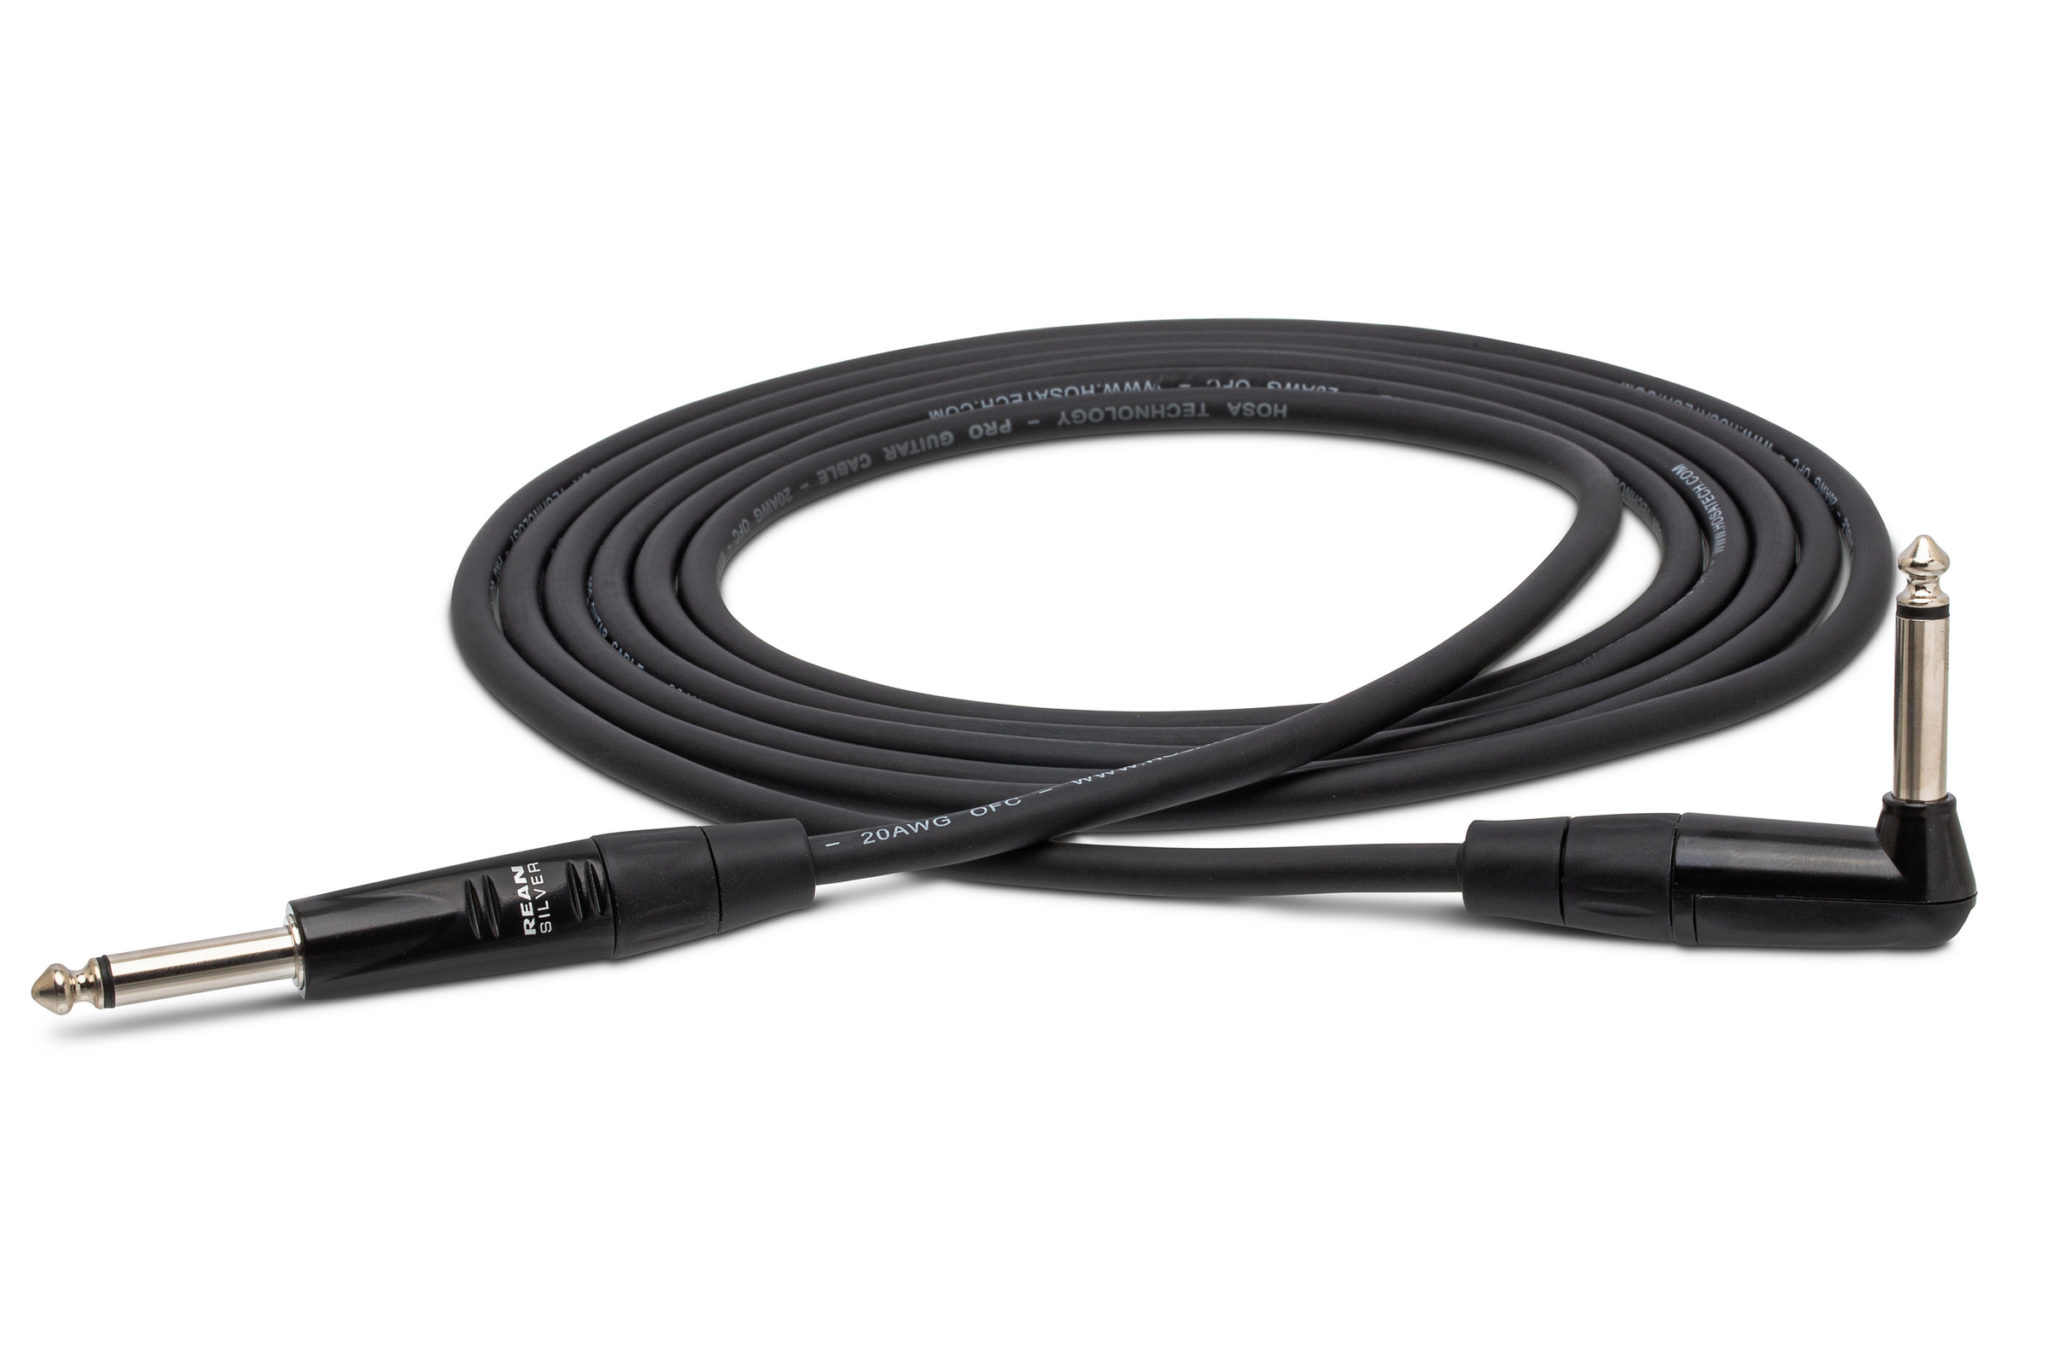 REAN Straight to Same - Pro Guitar Cable - Instrument Cables | Hosa Cables